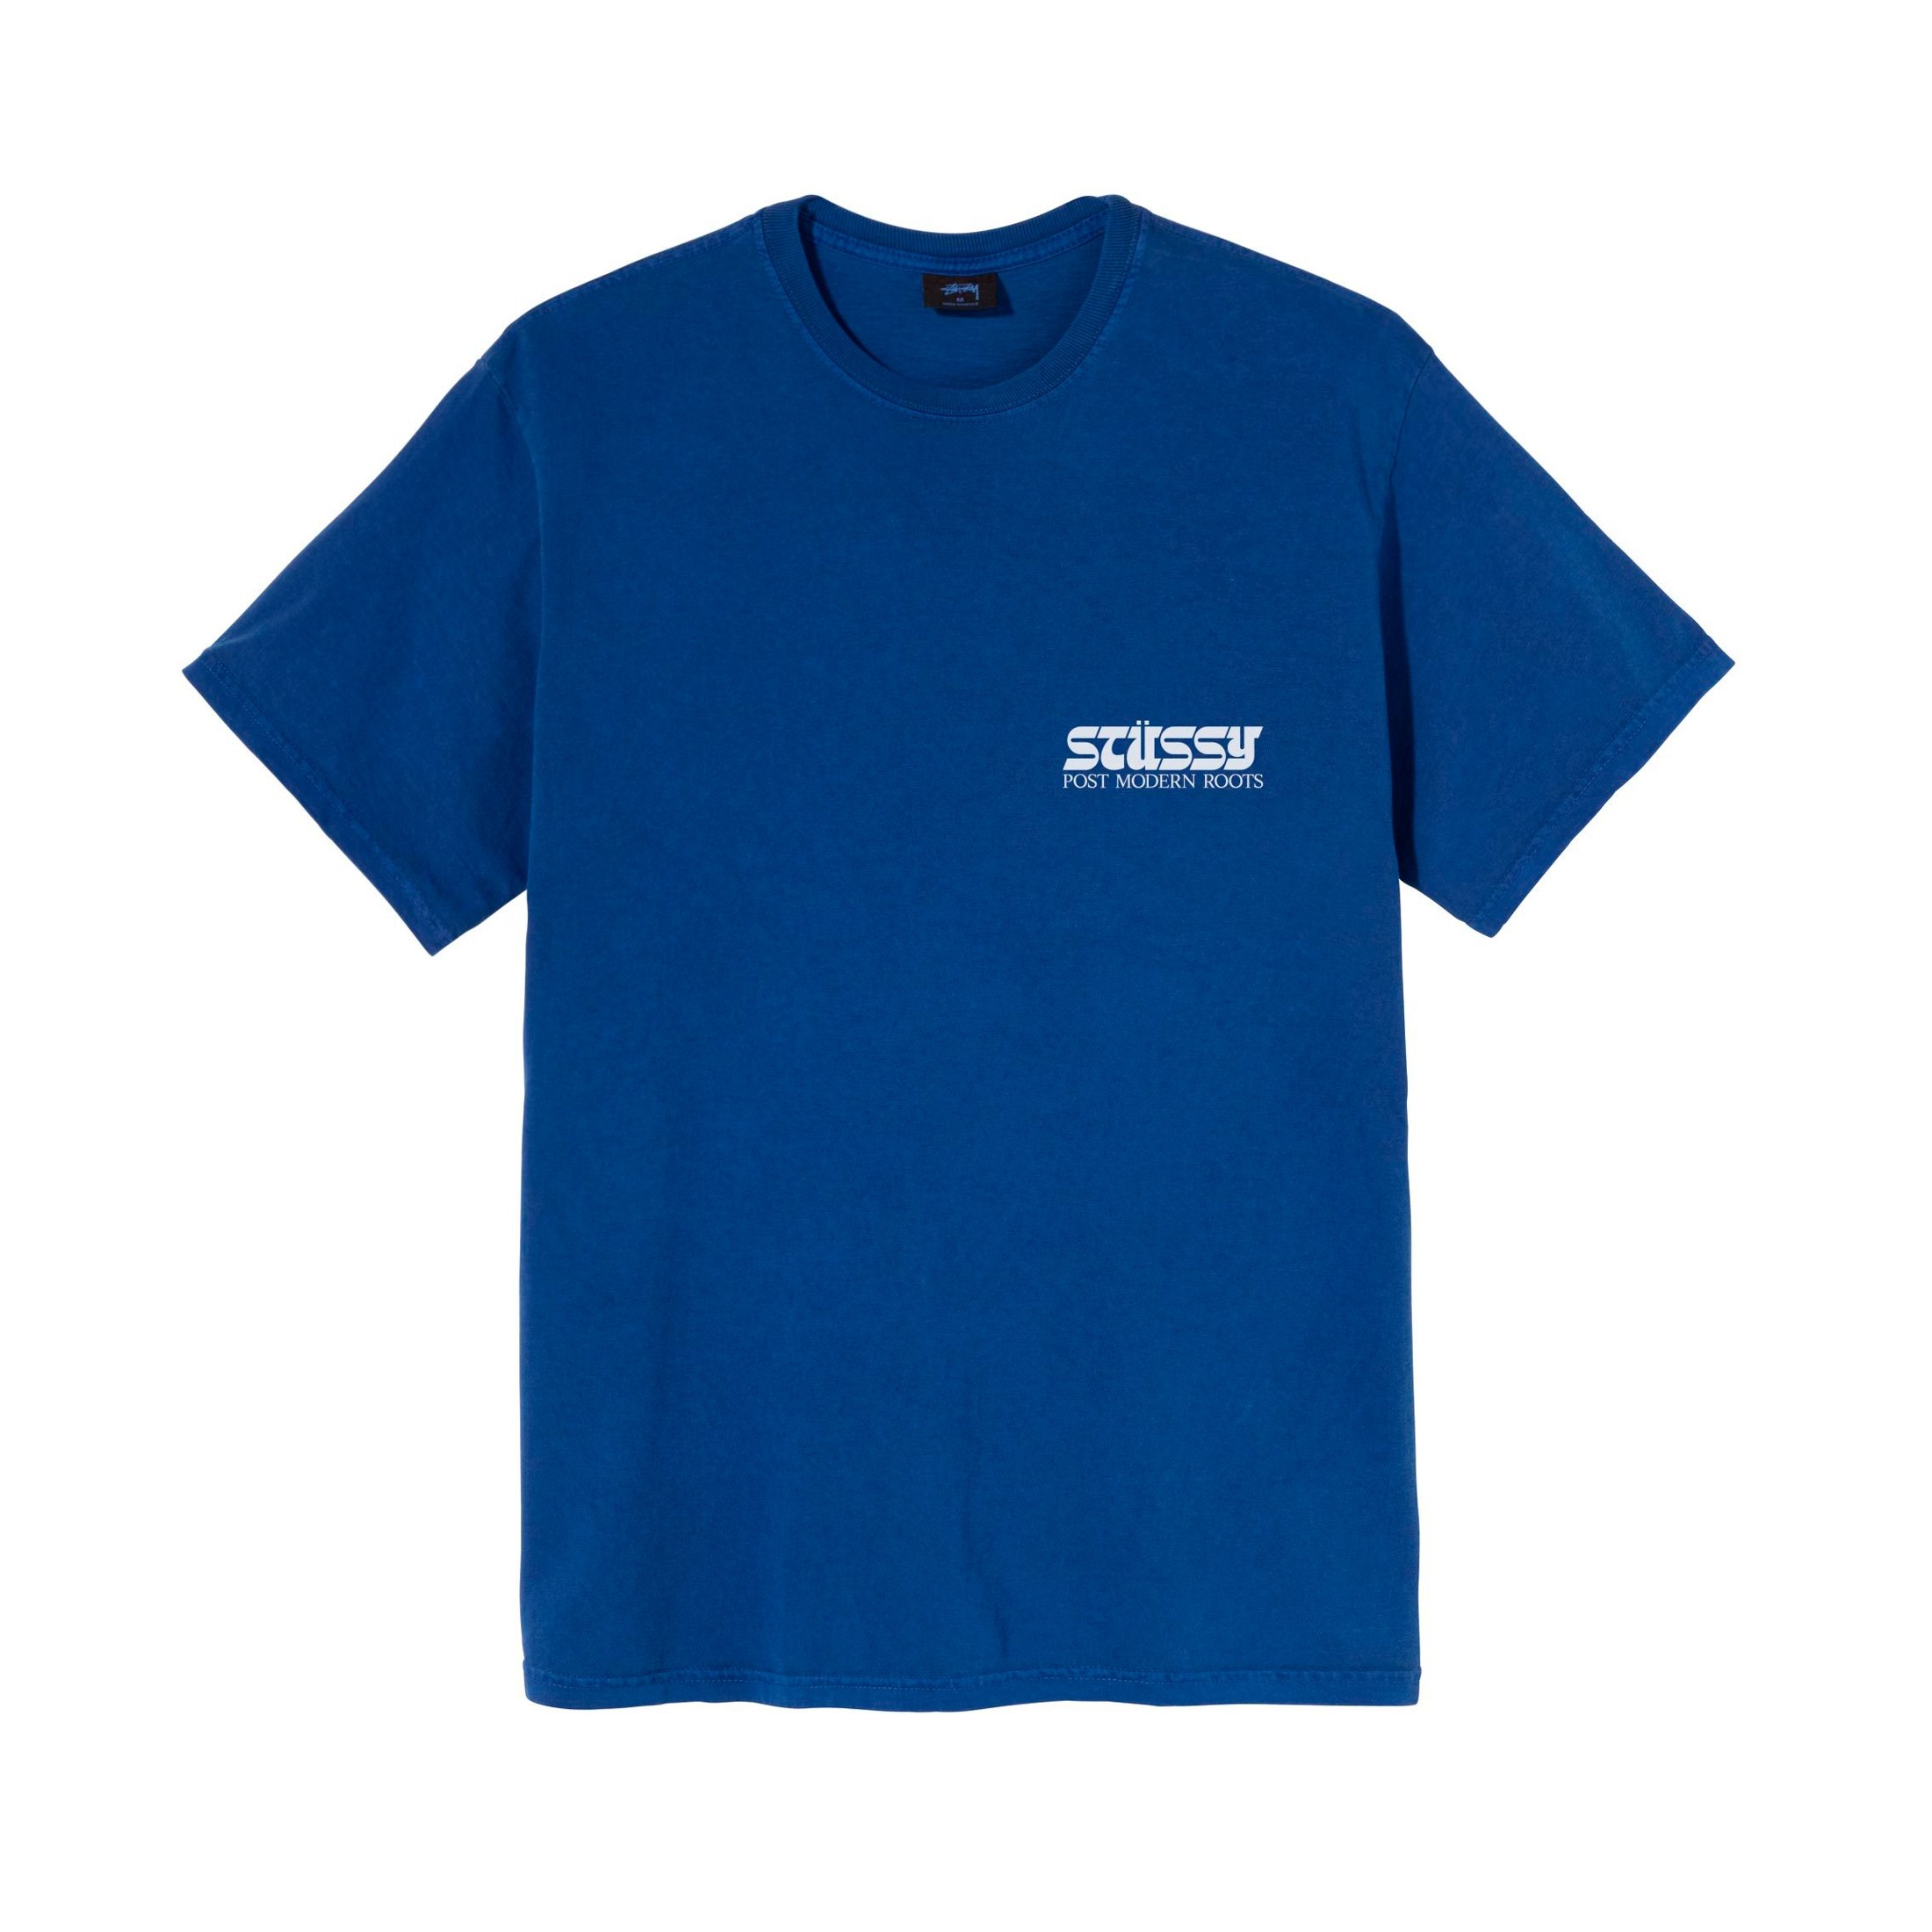 Stussy Post Modern Roots Pigment Dyed T-Shirt (Blue) - 1904636-BLU